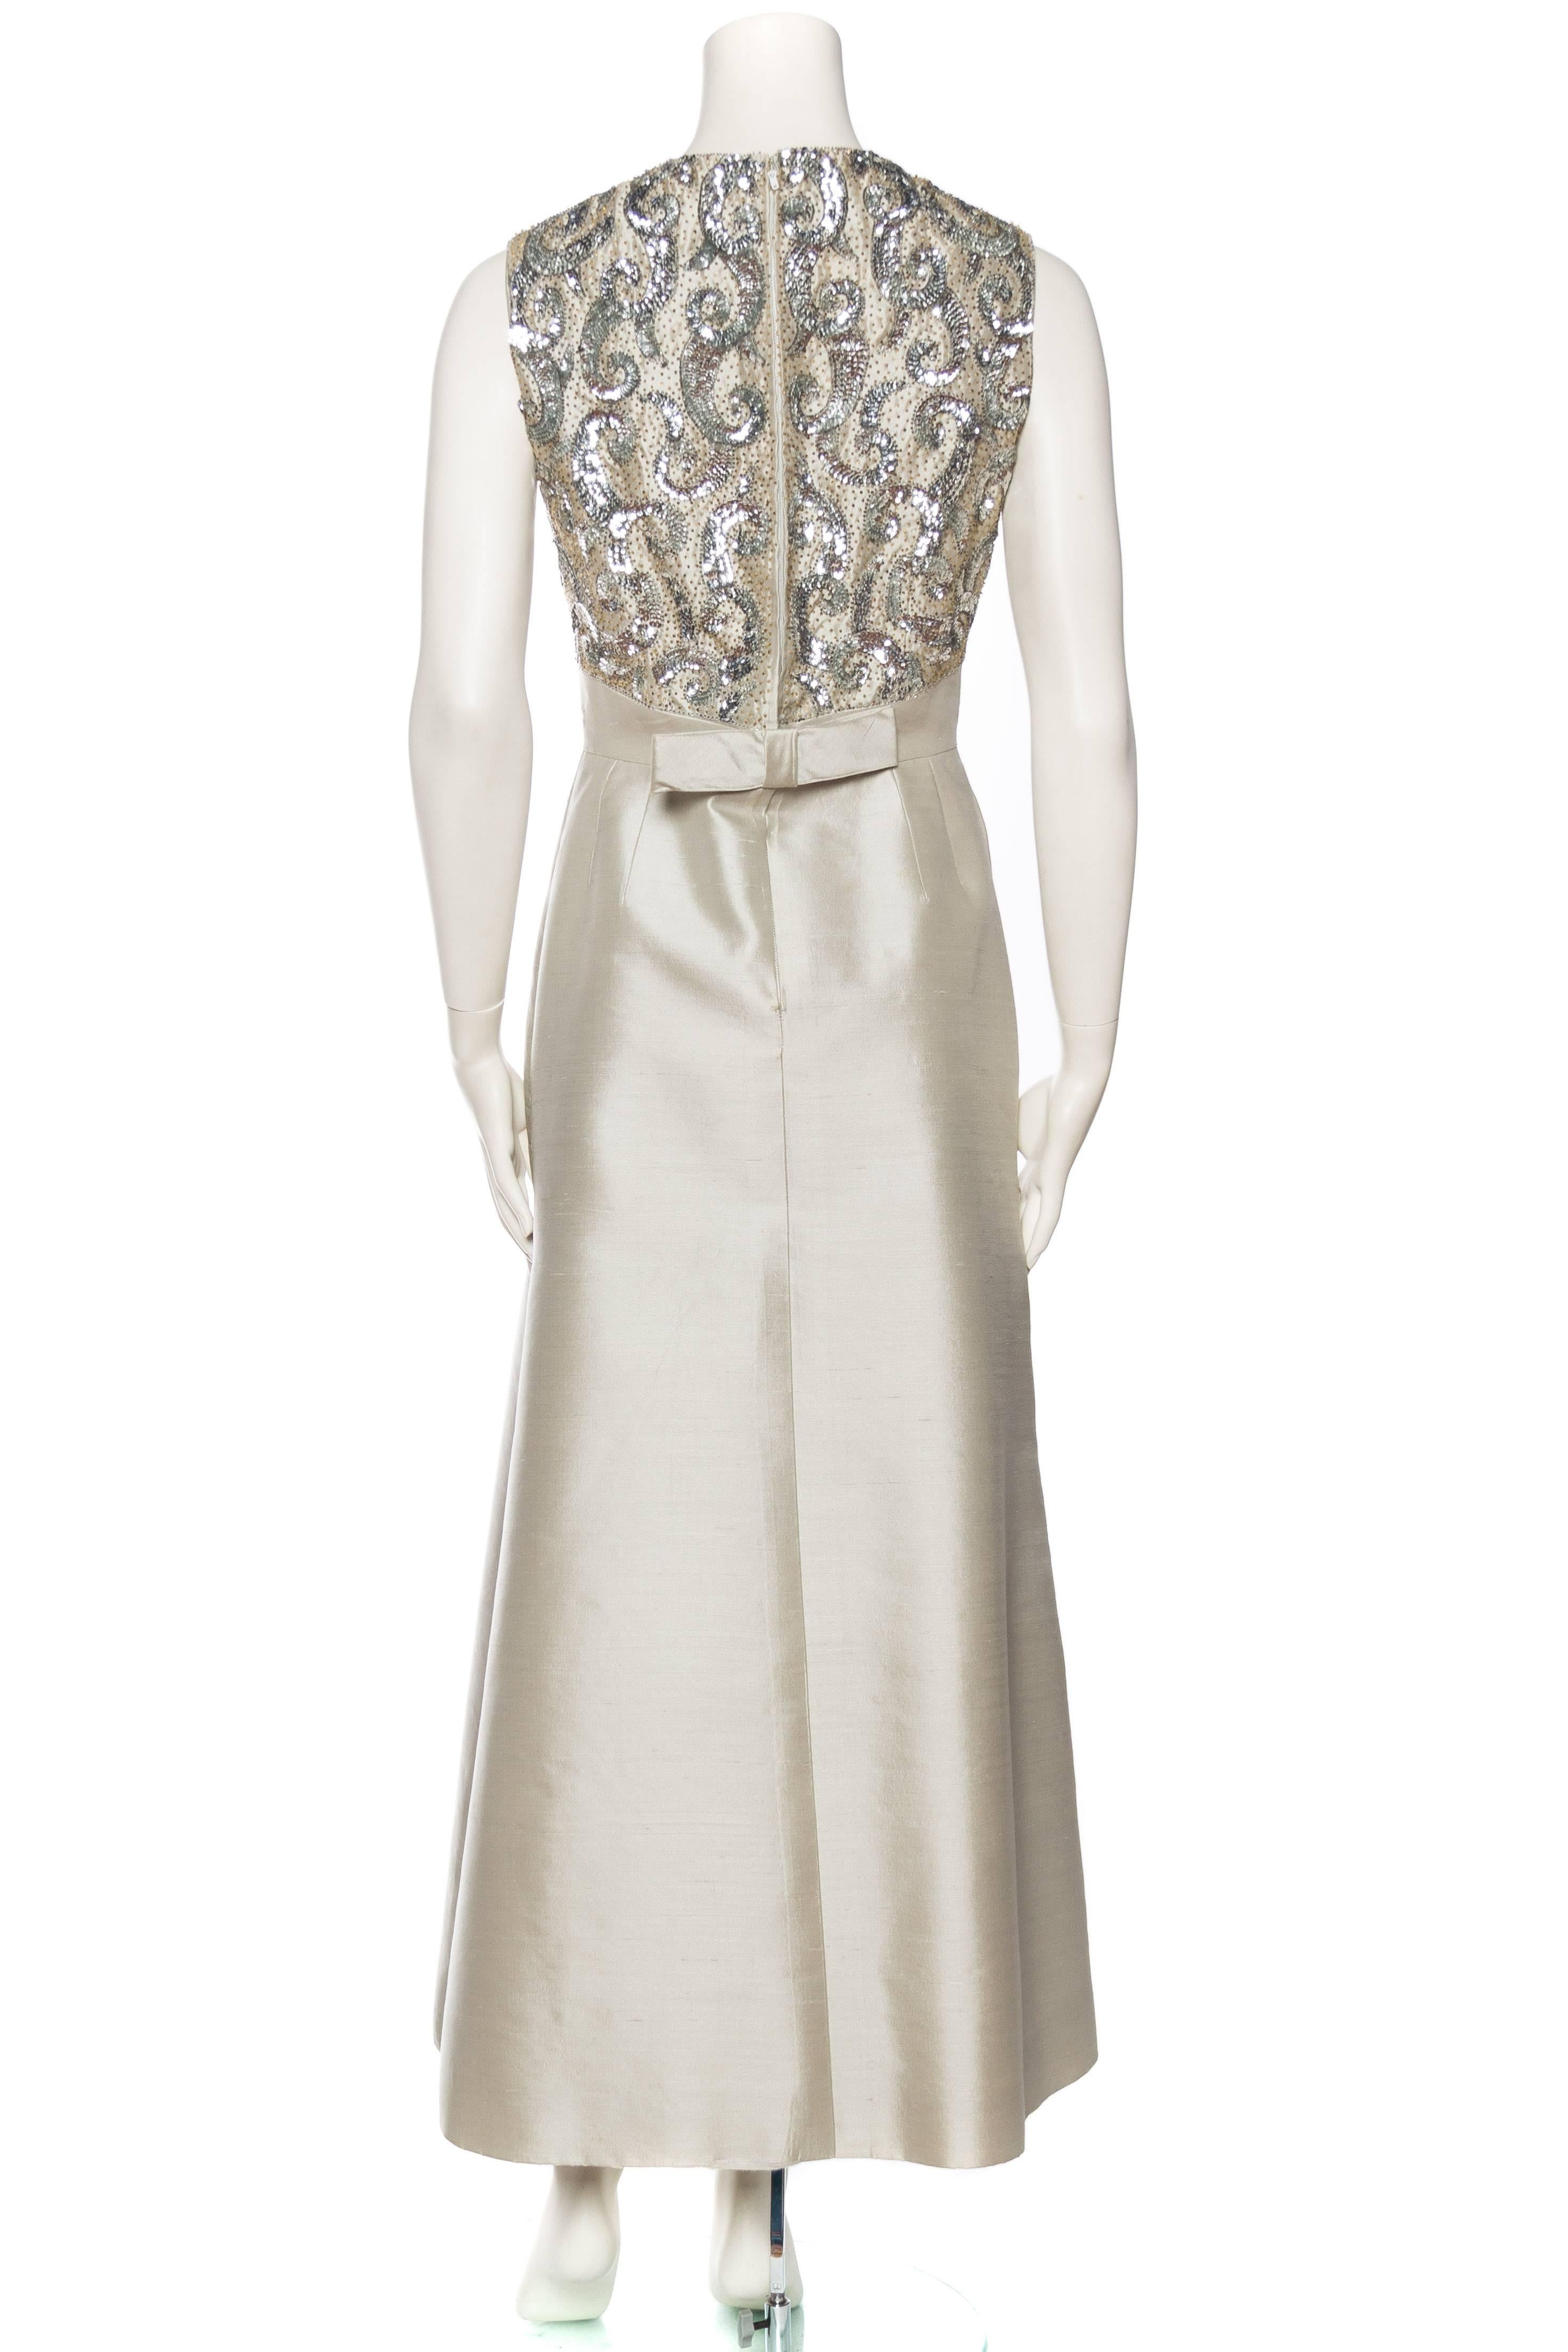 1960S GIBSON BAYH COUTURE Oyster Grey Silk Radzimir Half Empire Waist Silver Go In Excellent Condition For Sale In New York, NY